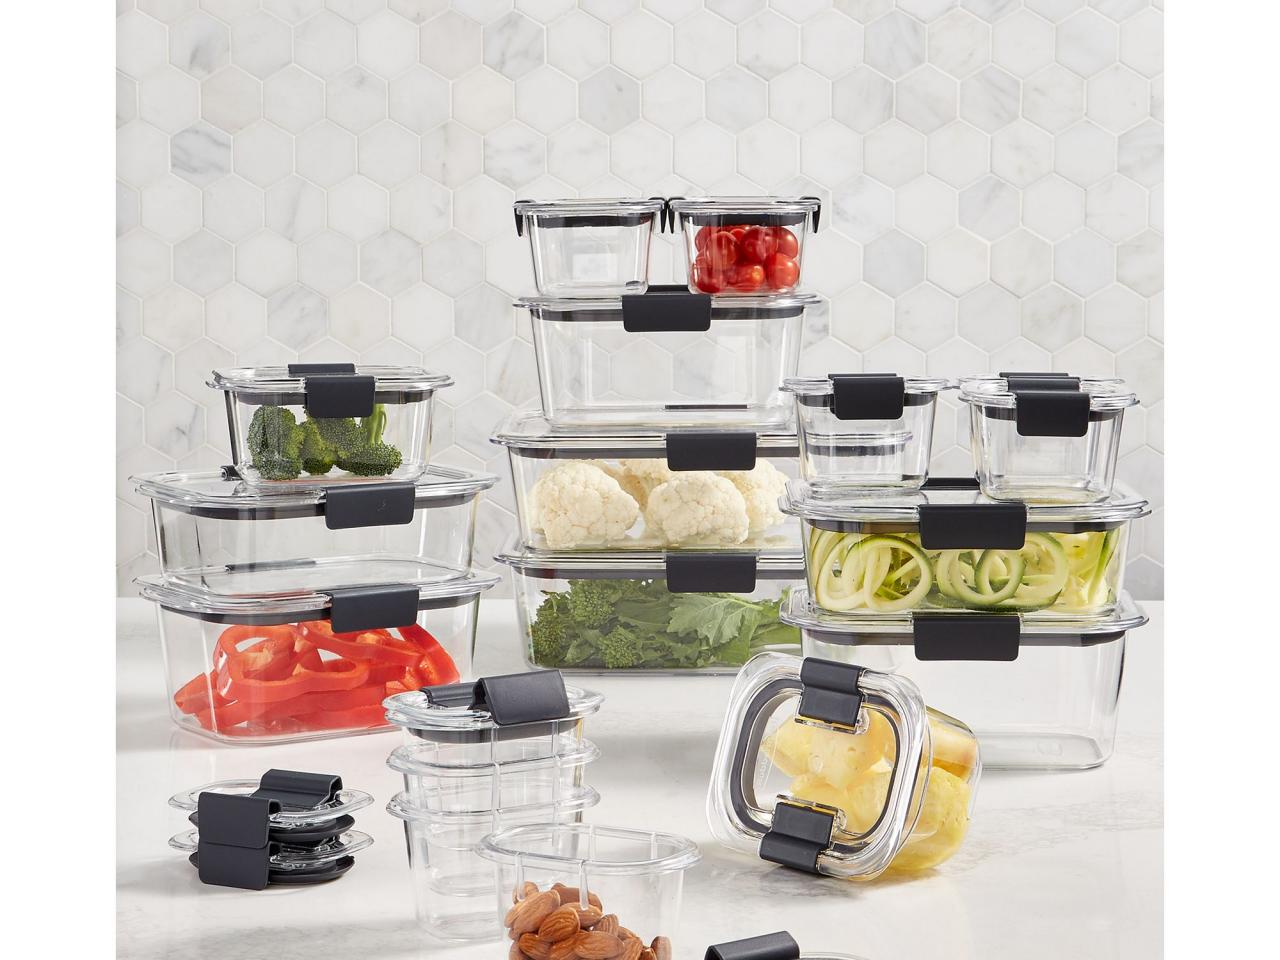 Pyrex 12-piece food storage set on sale for dirt cheap at Macy's